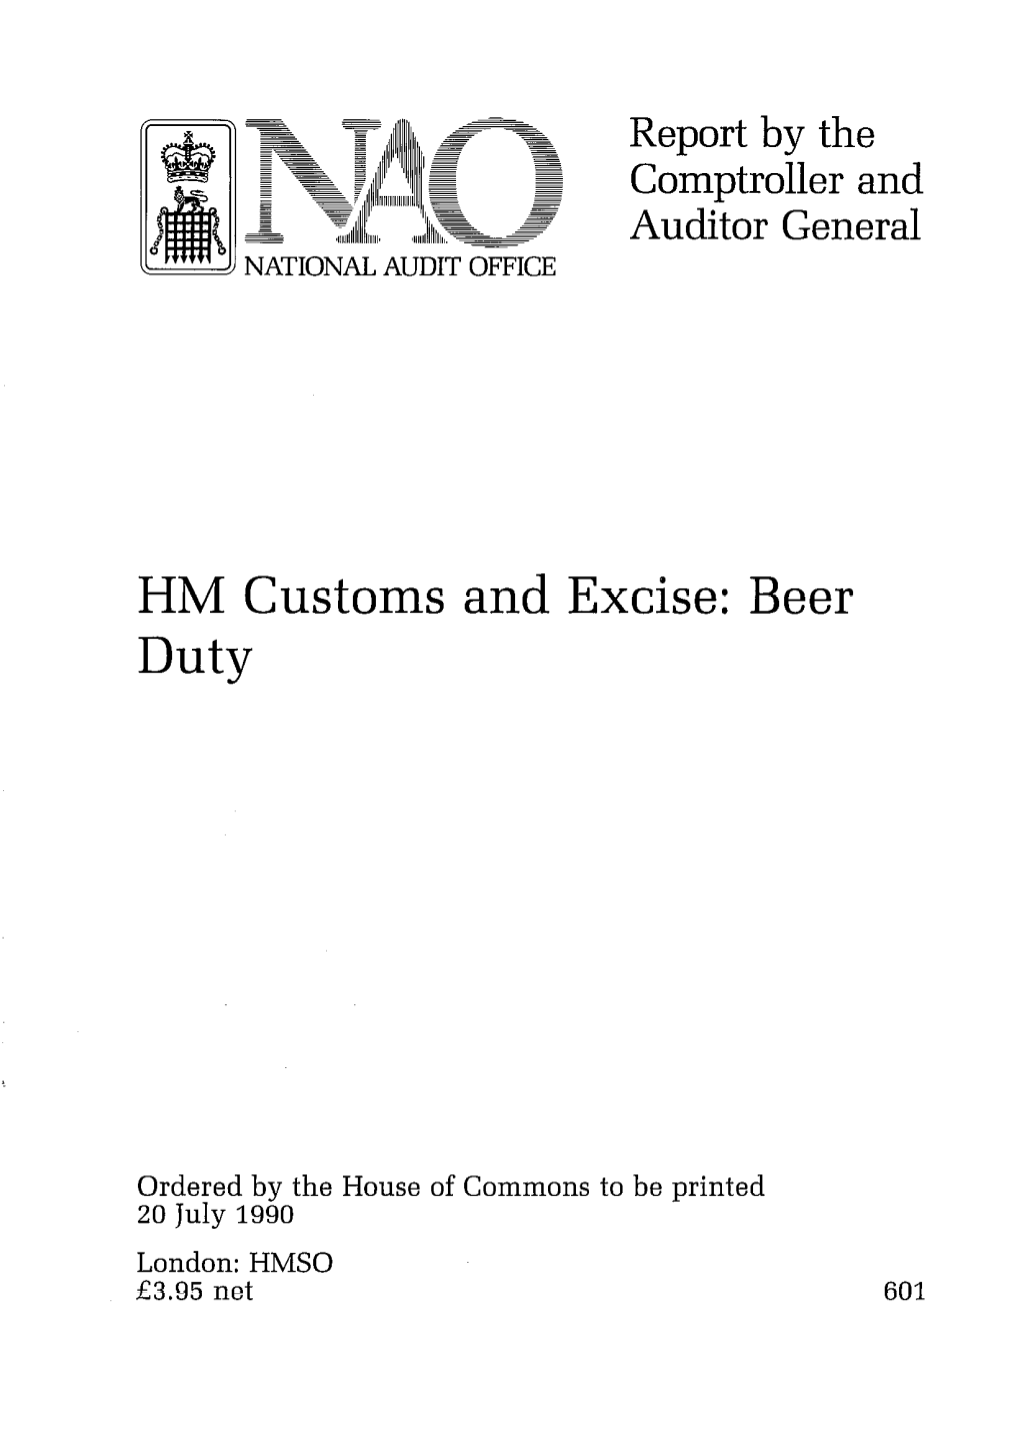 HM Customs and Excise: Beer Duty